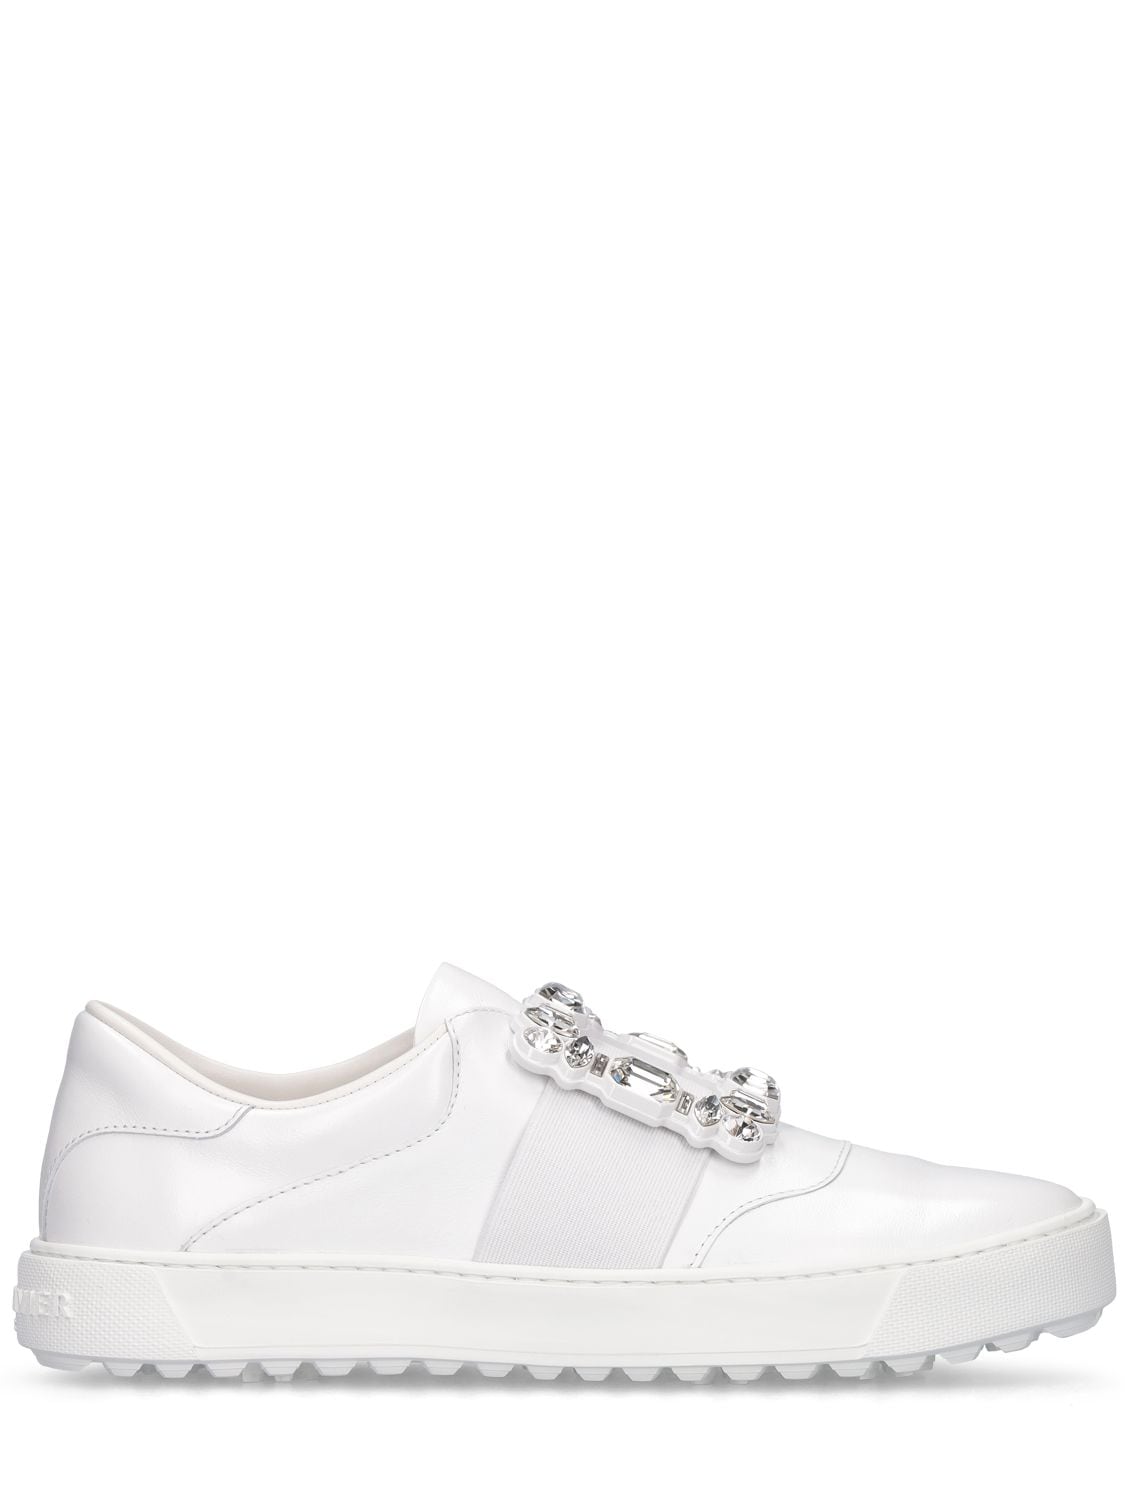 Roger Vivier 10mm Very Vivier Strass Leather Sneakers In White